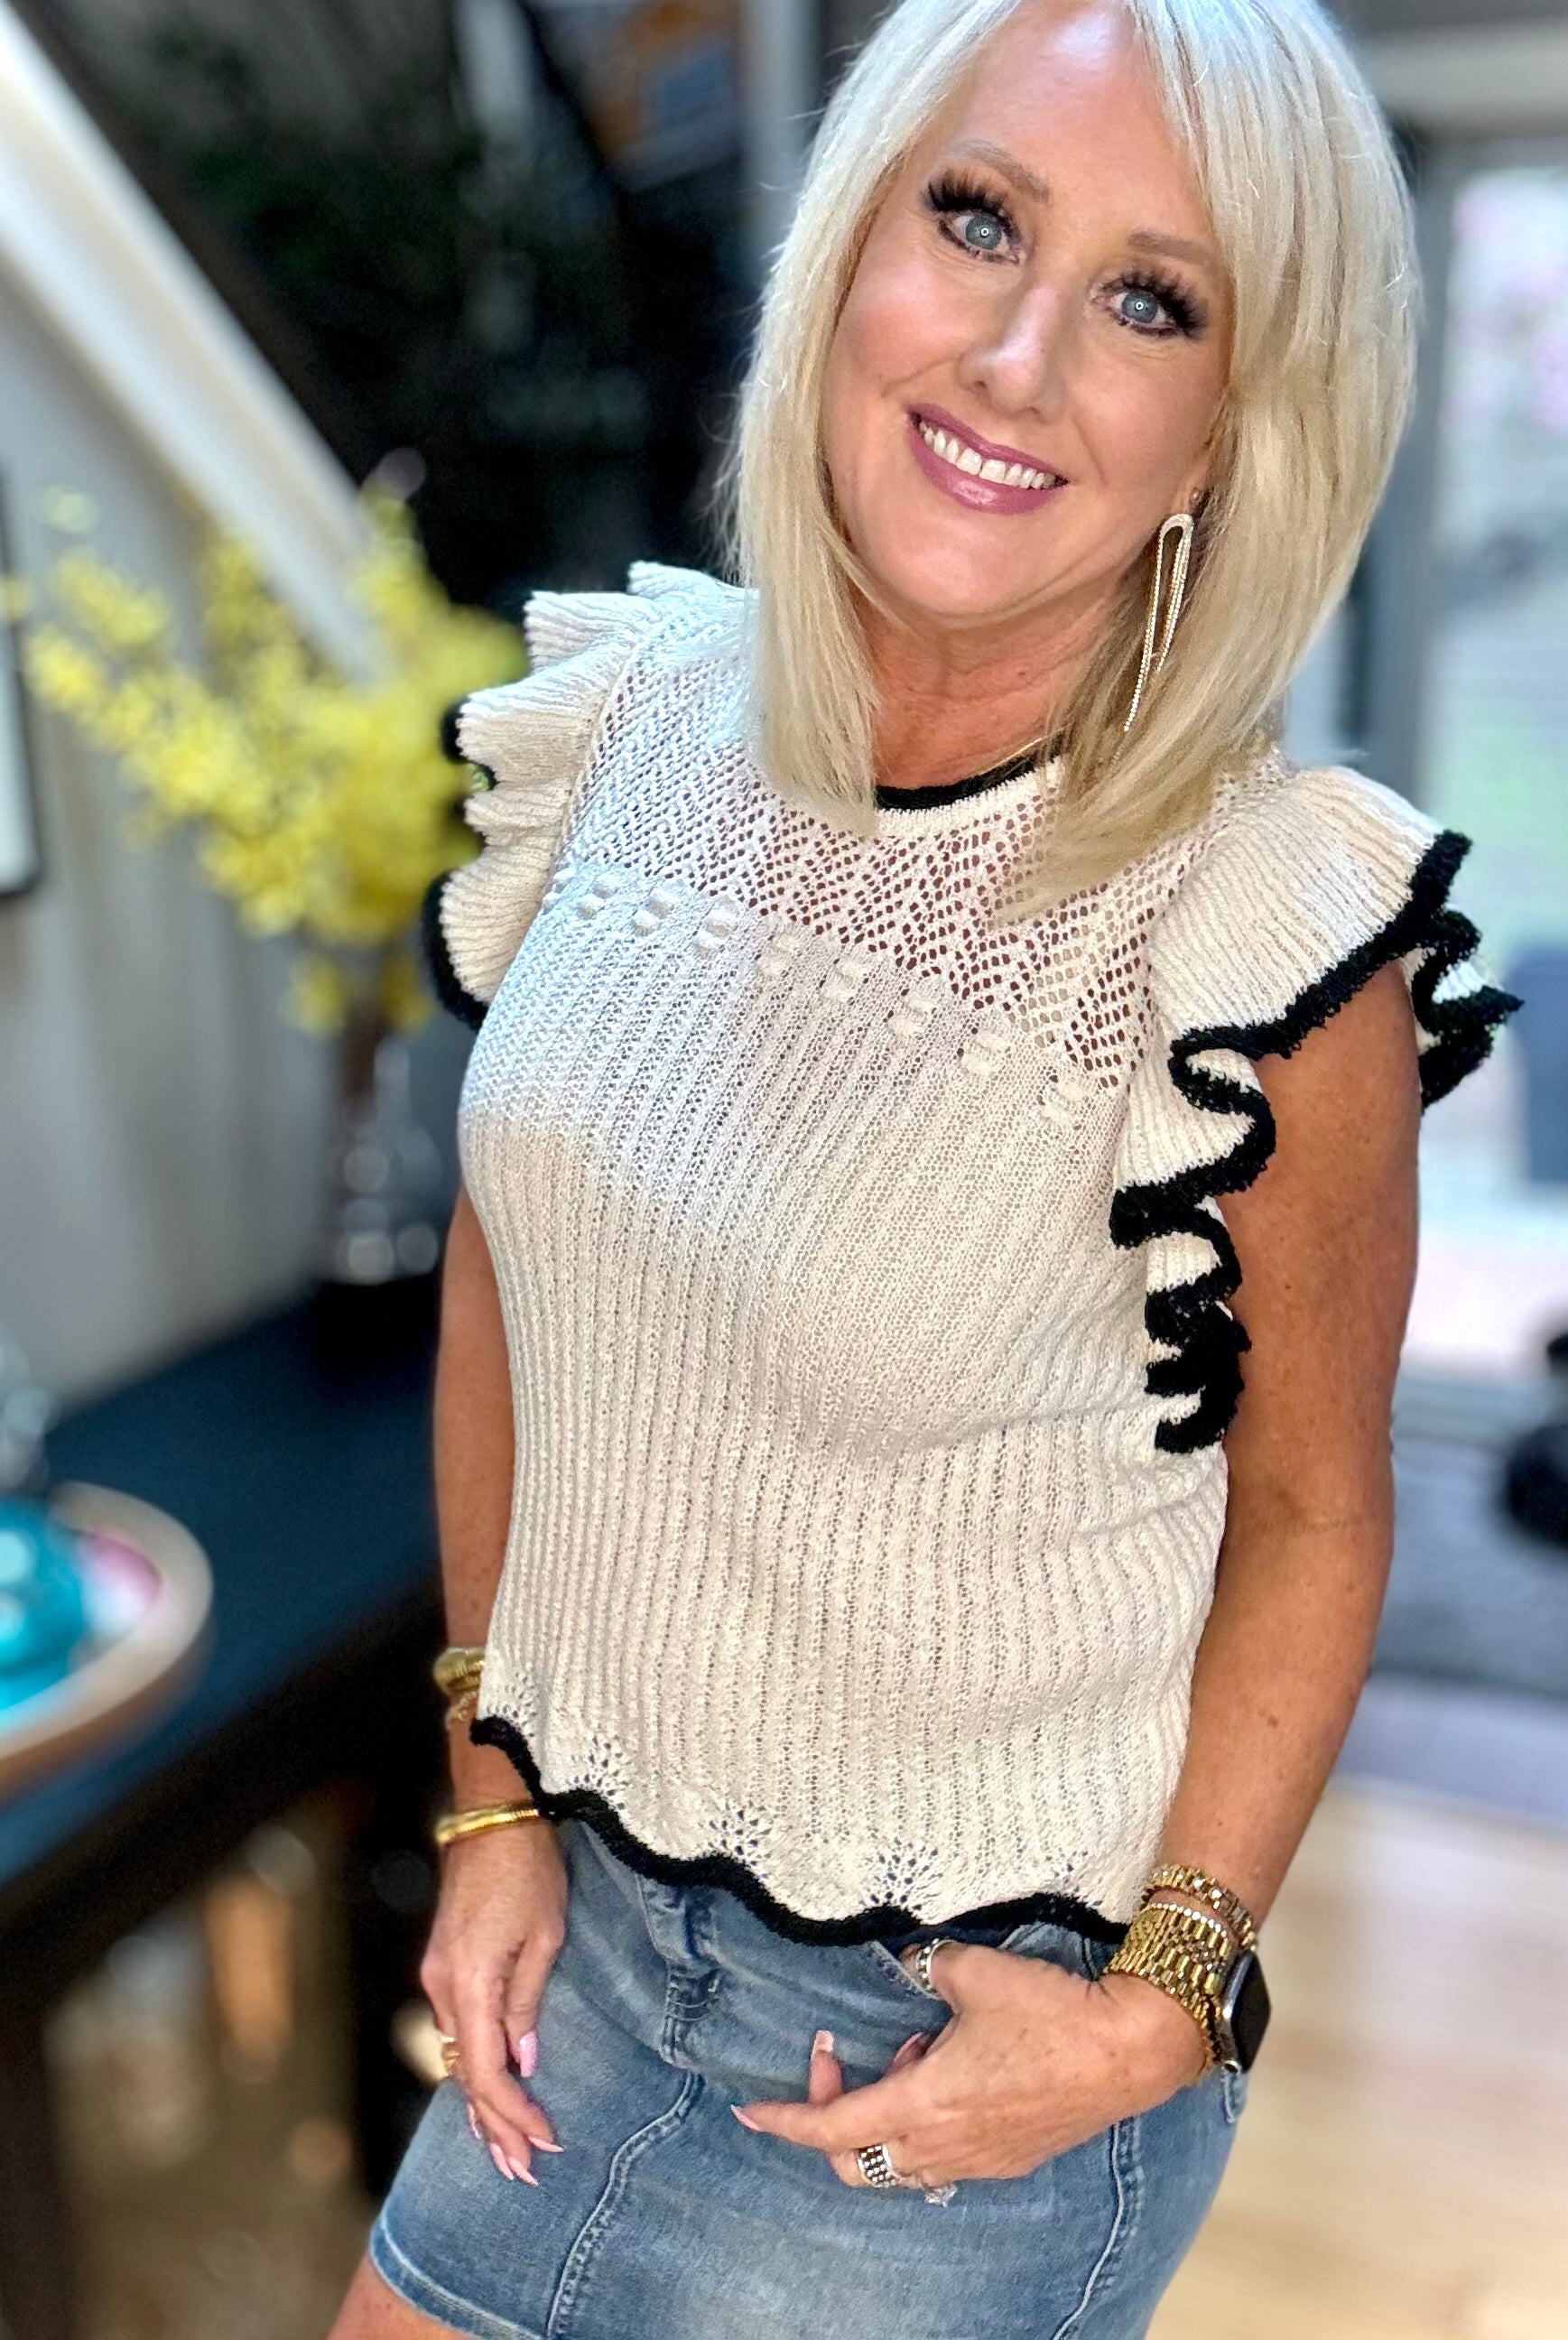 Too Sweet Flutter Sleeve Knit Top-Short Sleeves-Ave Shops-Urban Threadz Boutique, Women's Fashion Boutique in Saugatuck, MI